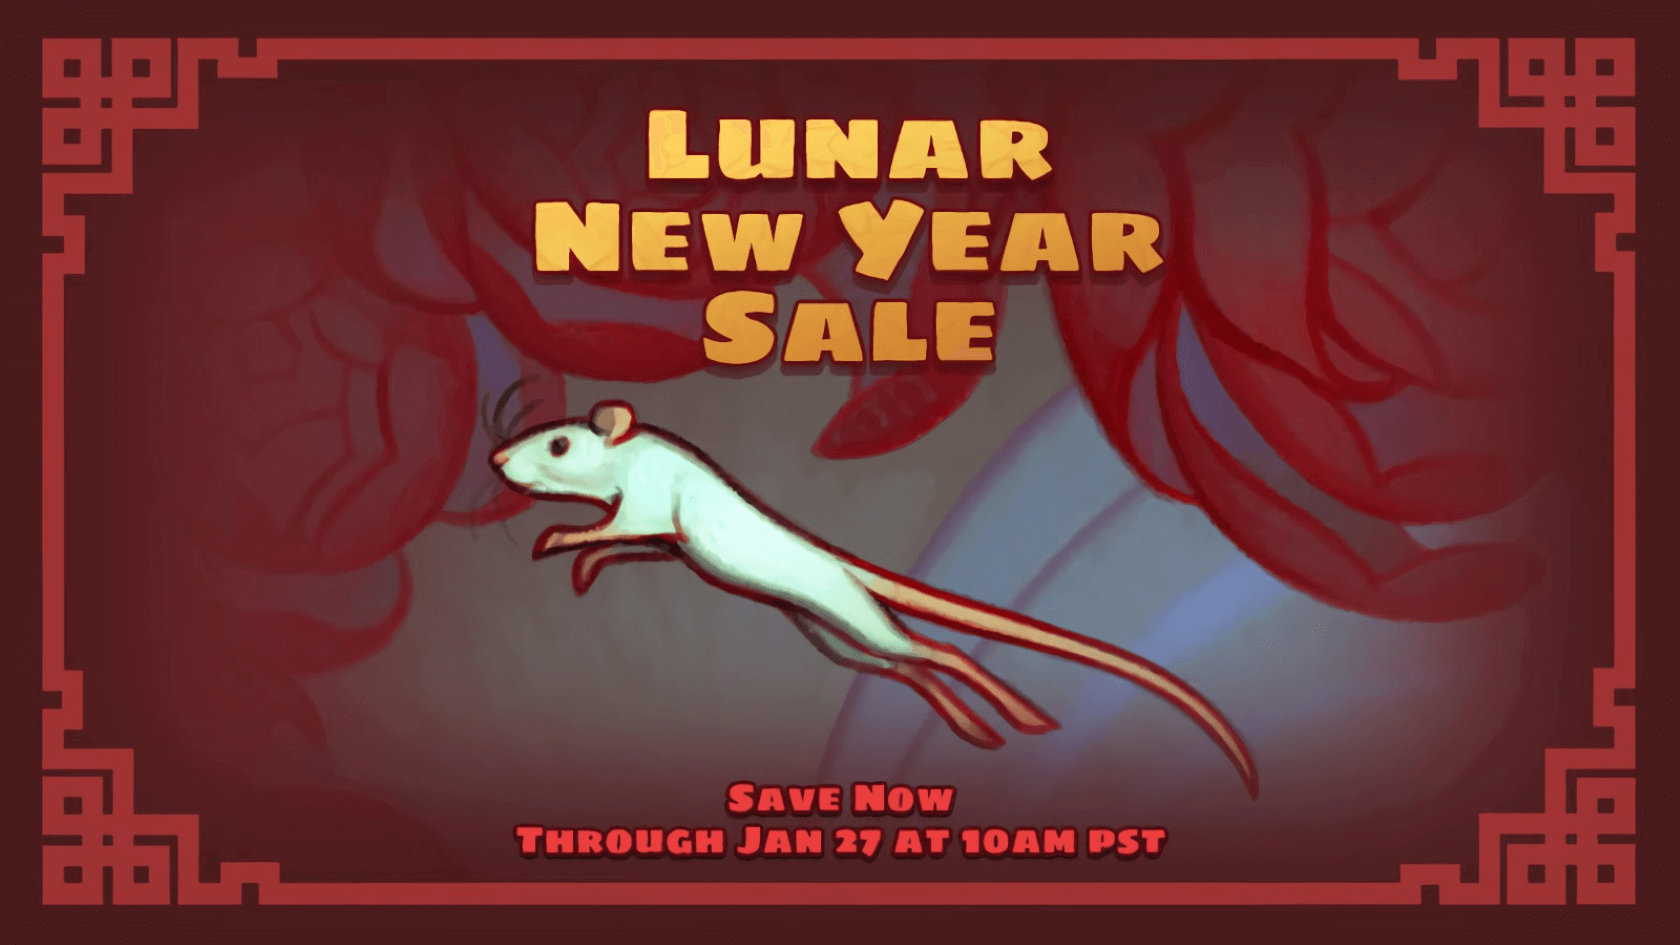 Steam celebrates the Year of the Rat with its latest Lunar New Year Sale